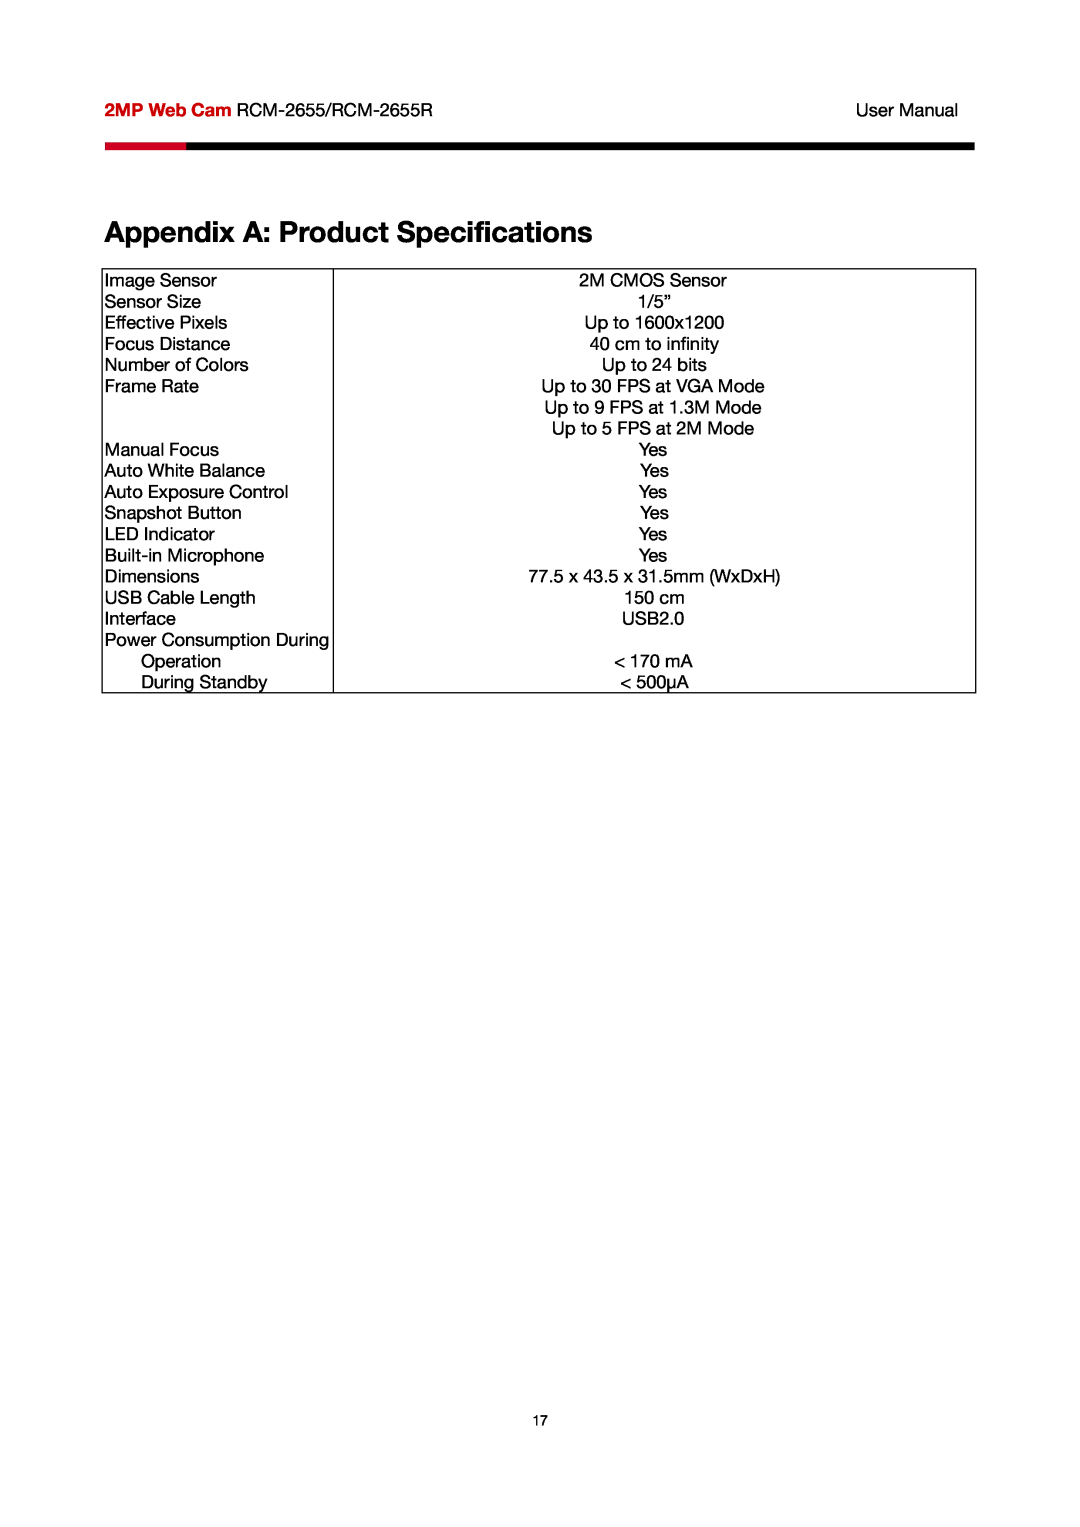 Rosewill RCM-2655R user manual Appendix A Product Specifications 